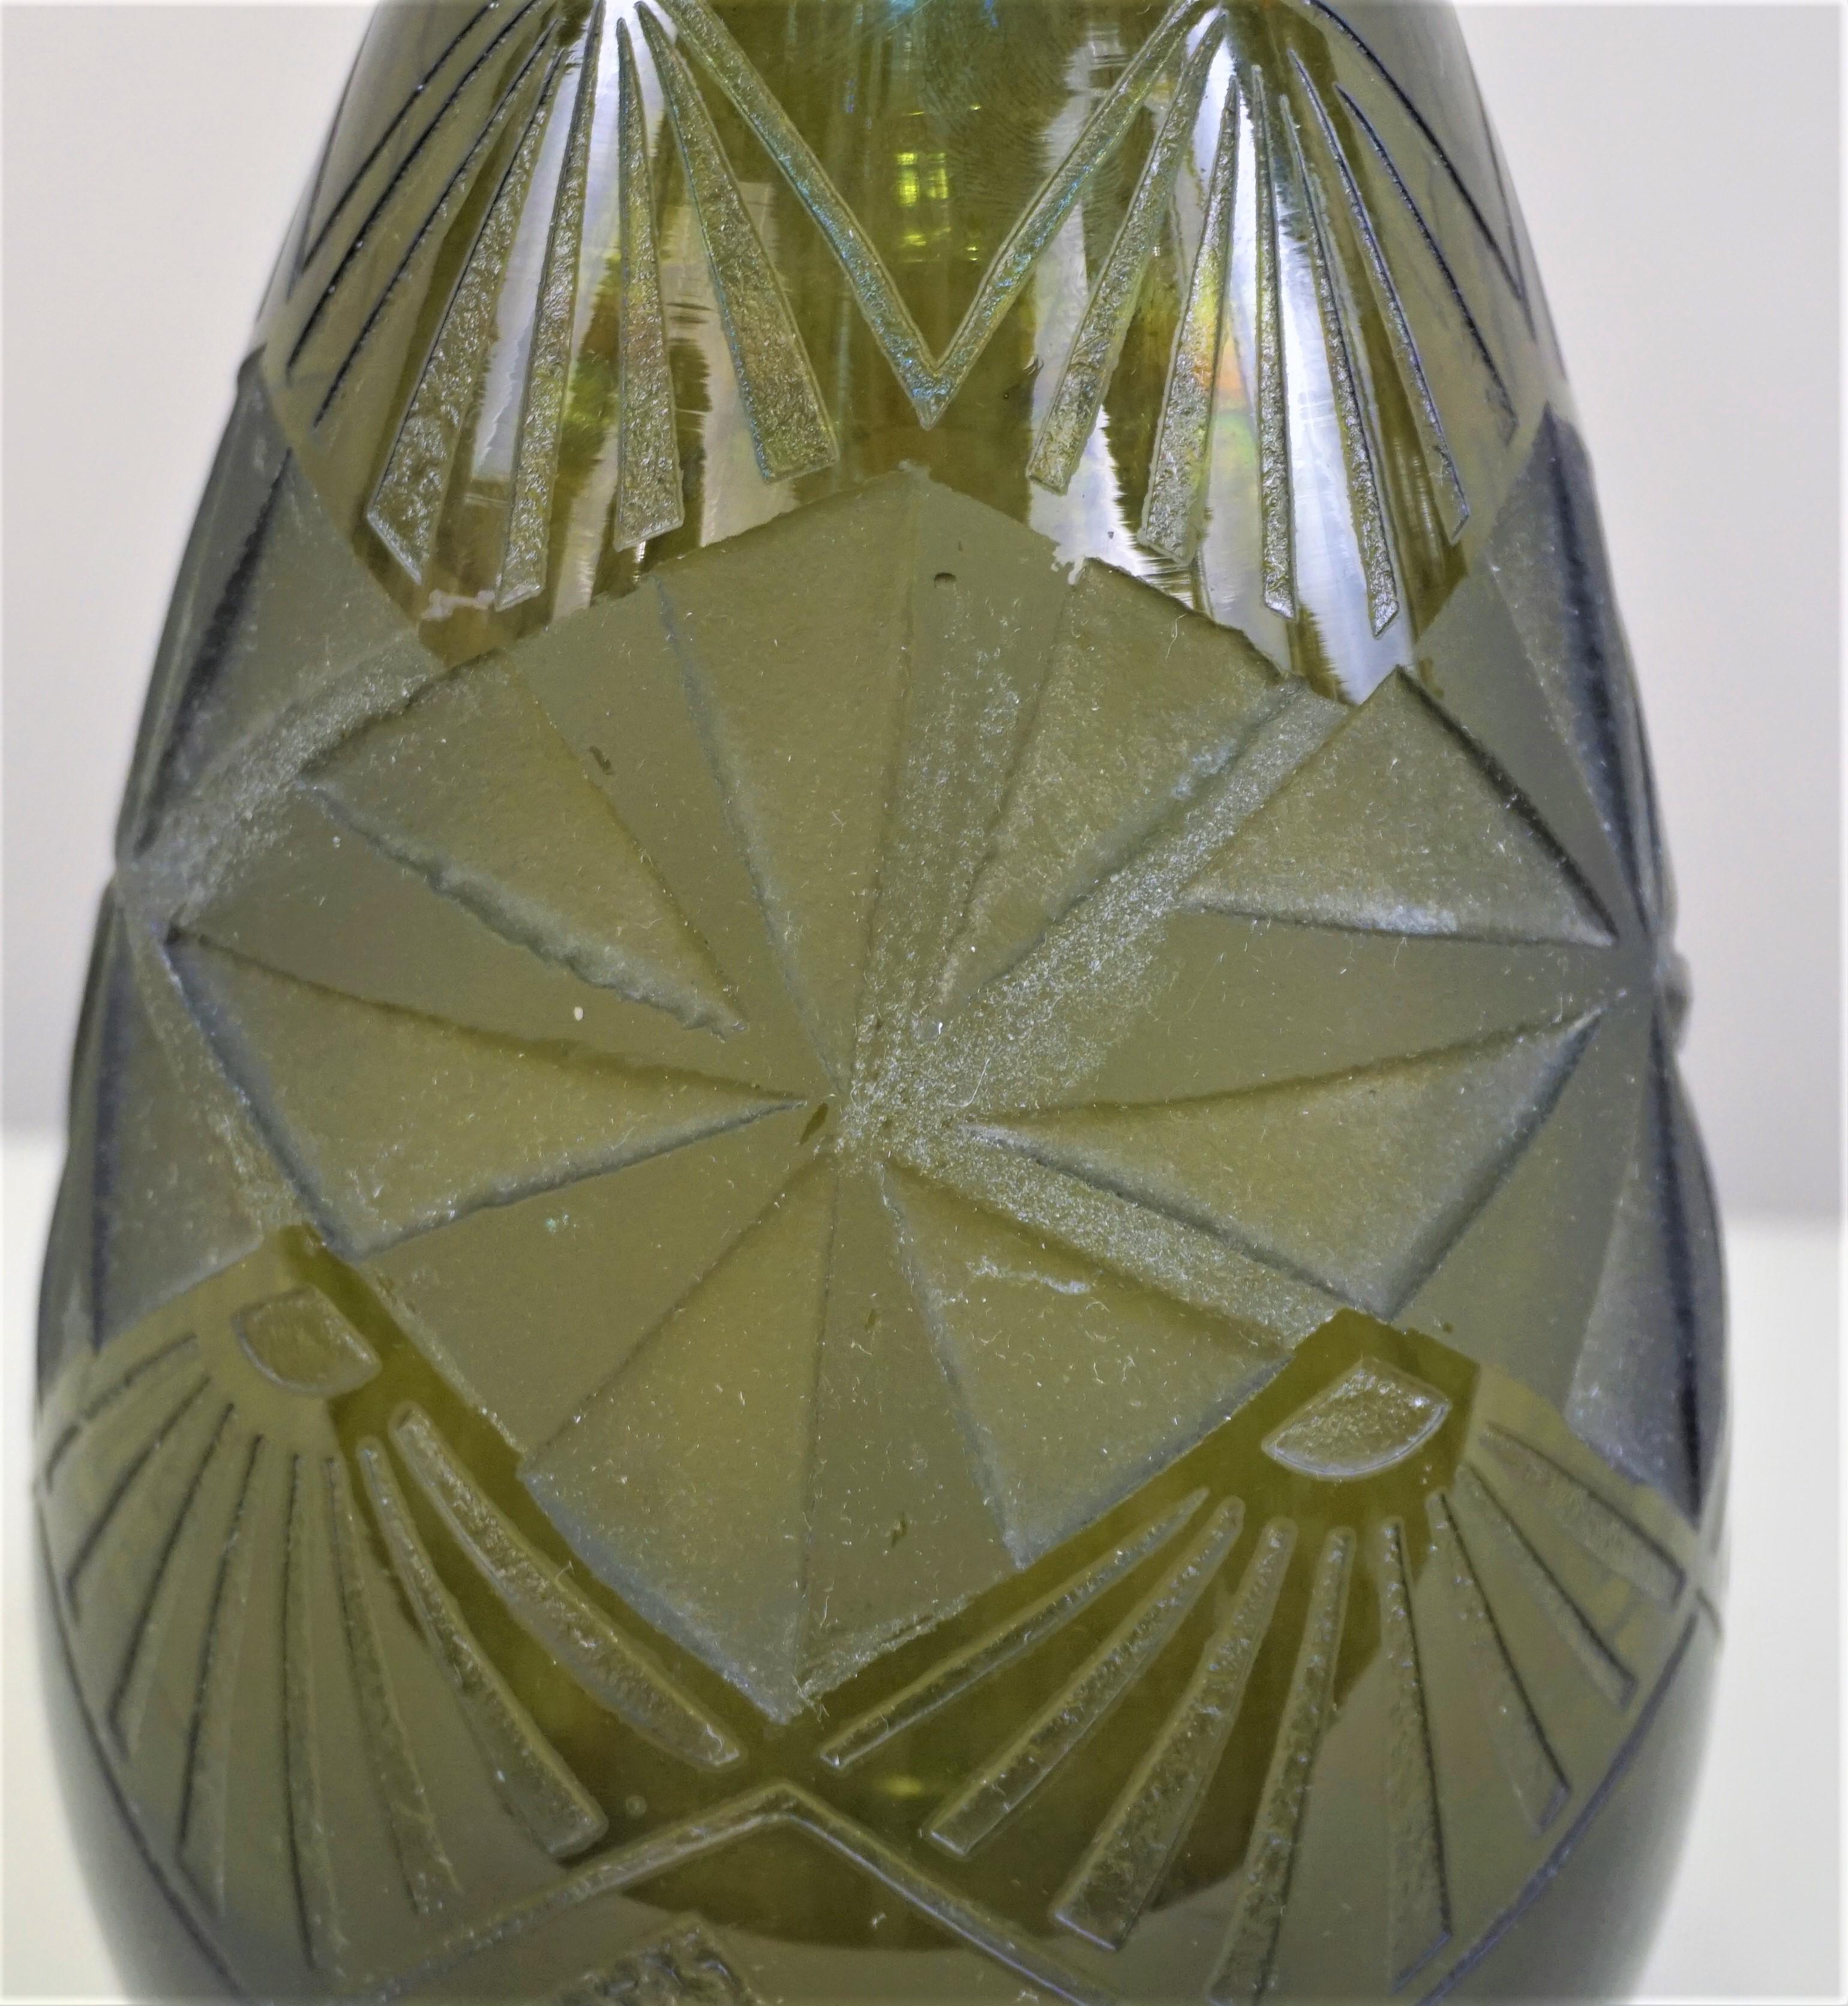 French 1930s geometric deep acid cut cameo Art Deco glass vase by one of the great names of French antique glass Legras.